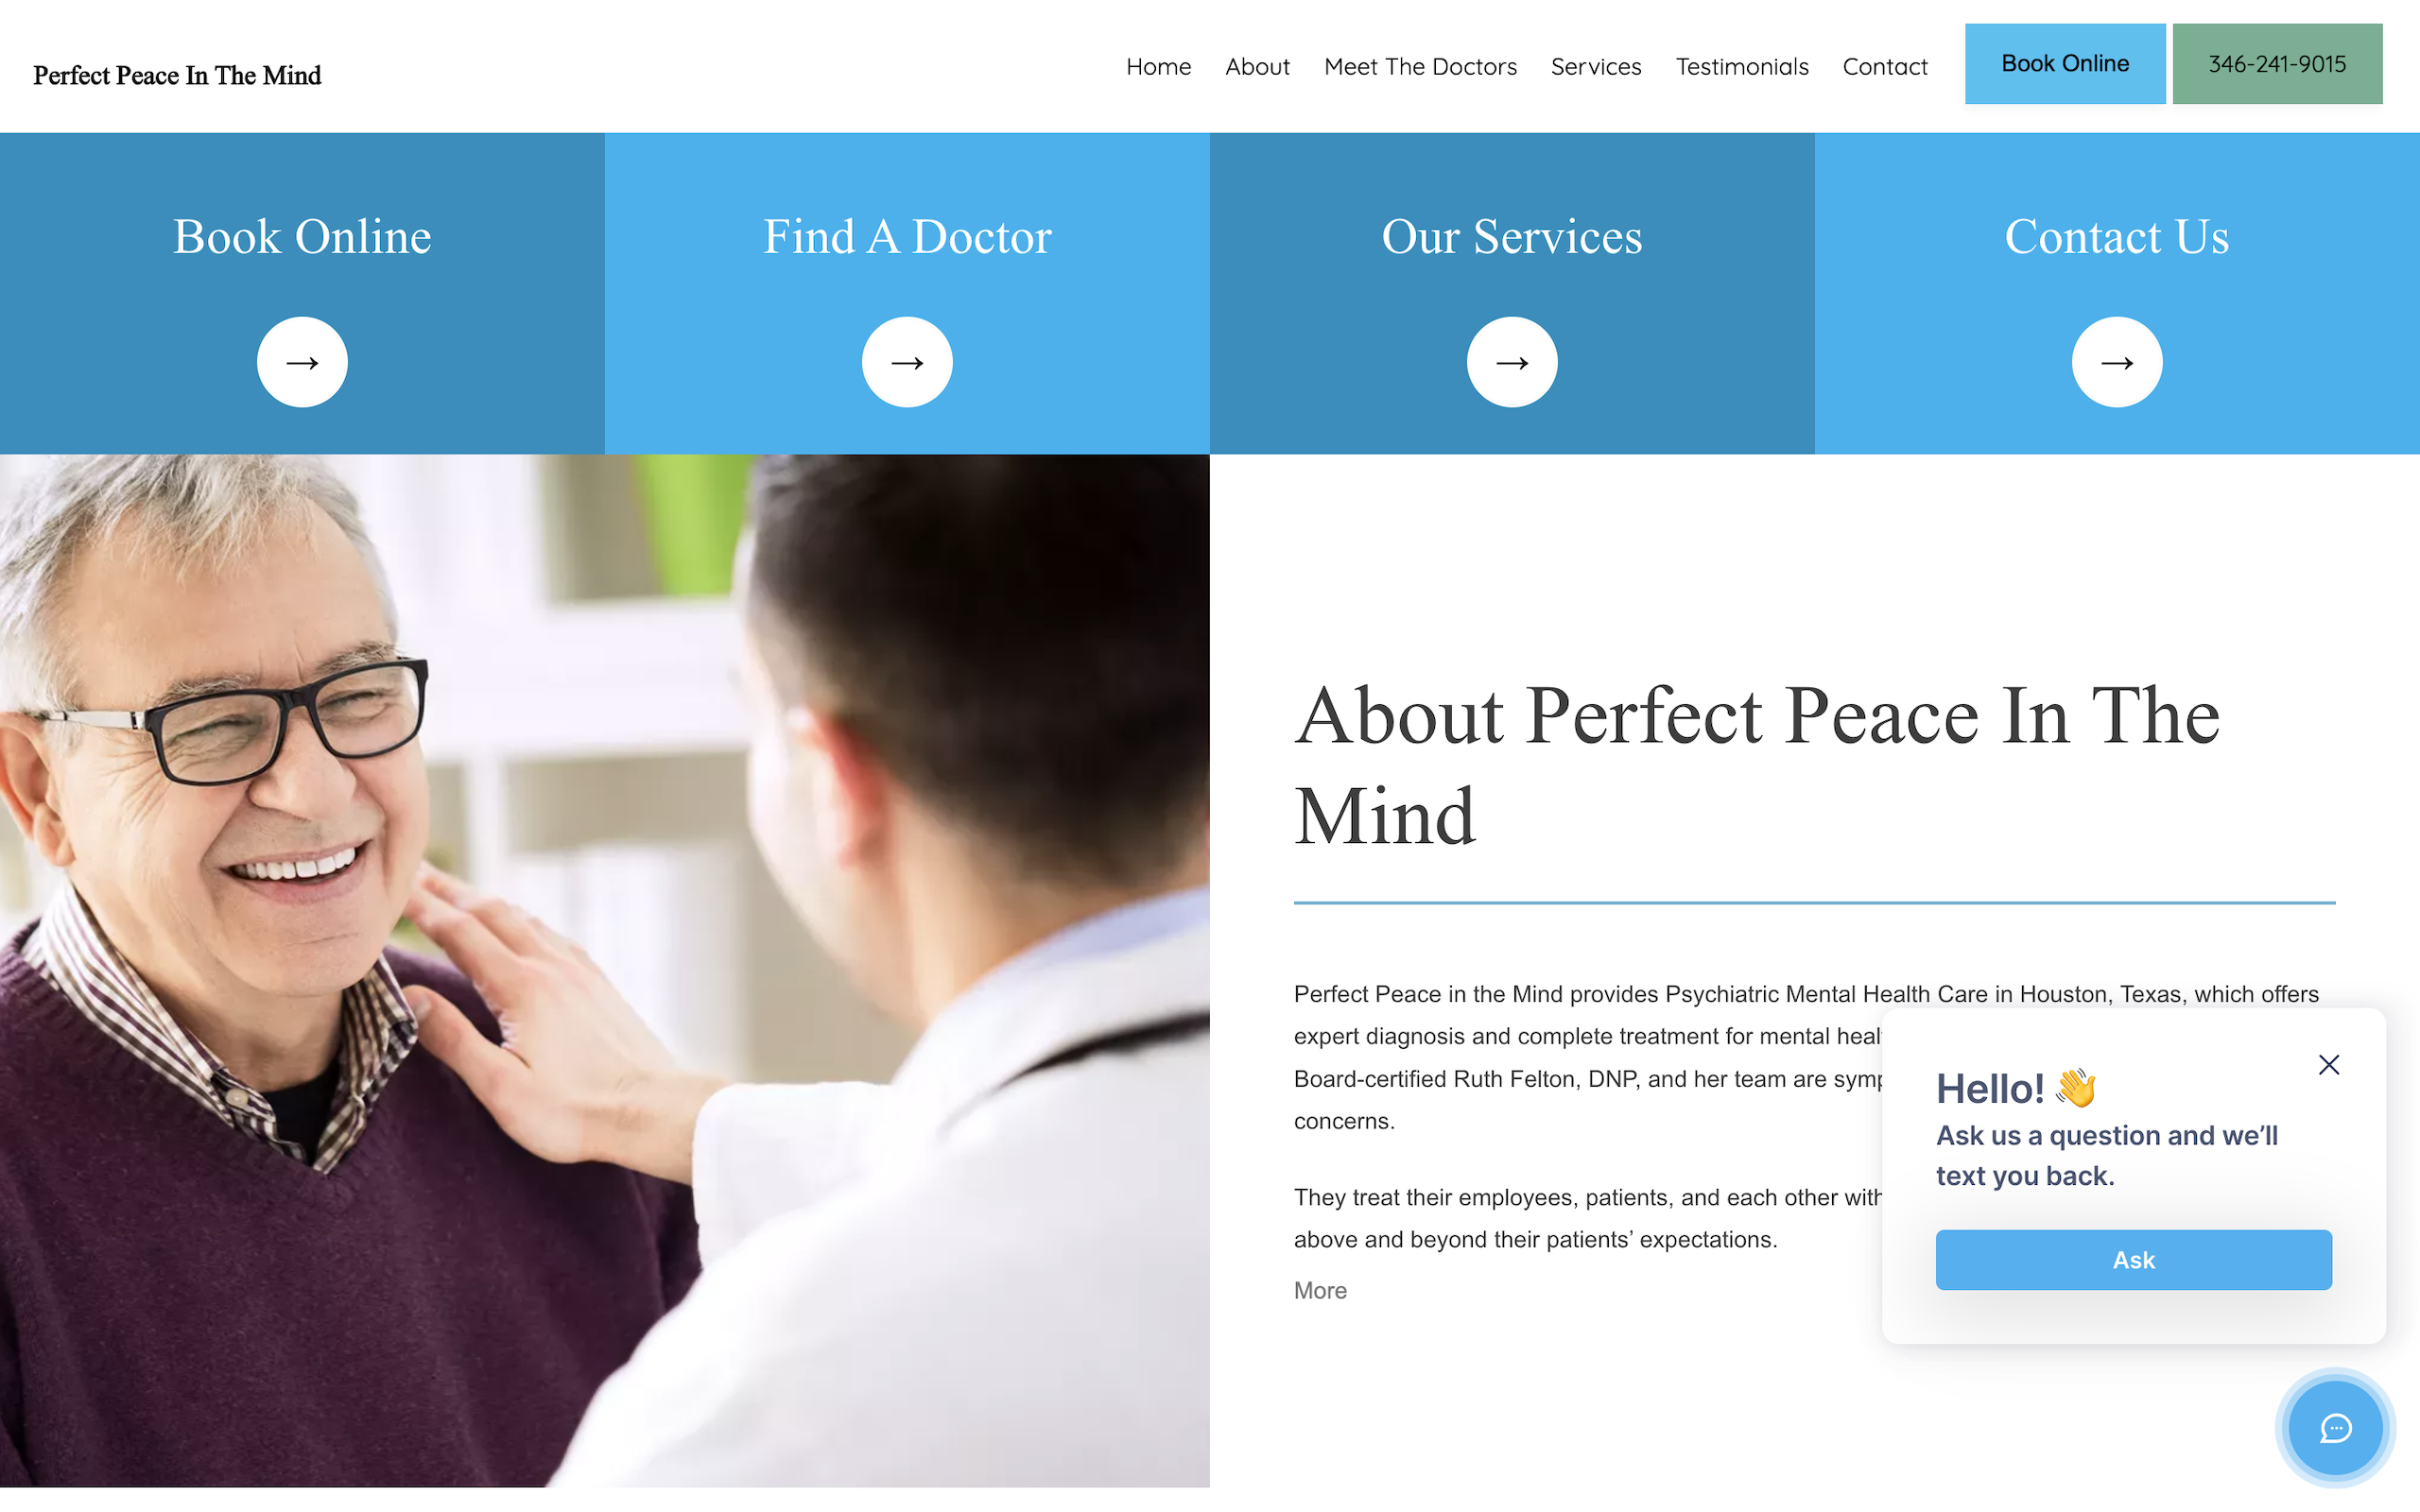 Perfect Peace in the Mind medical practice design example that shows a chatbot